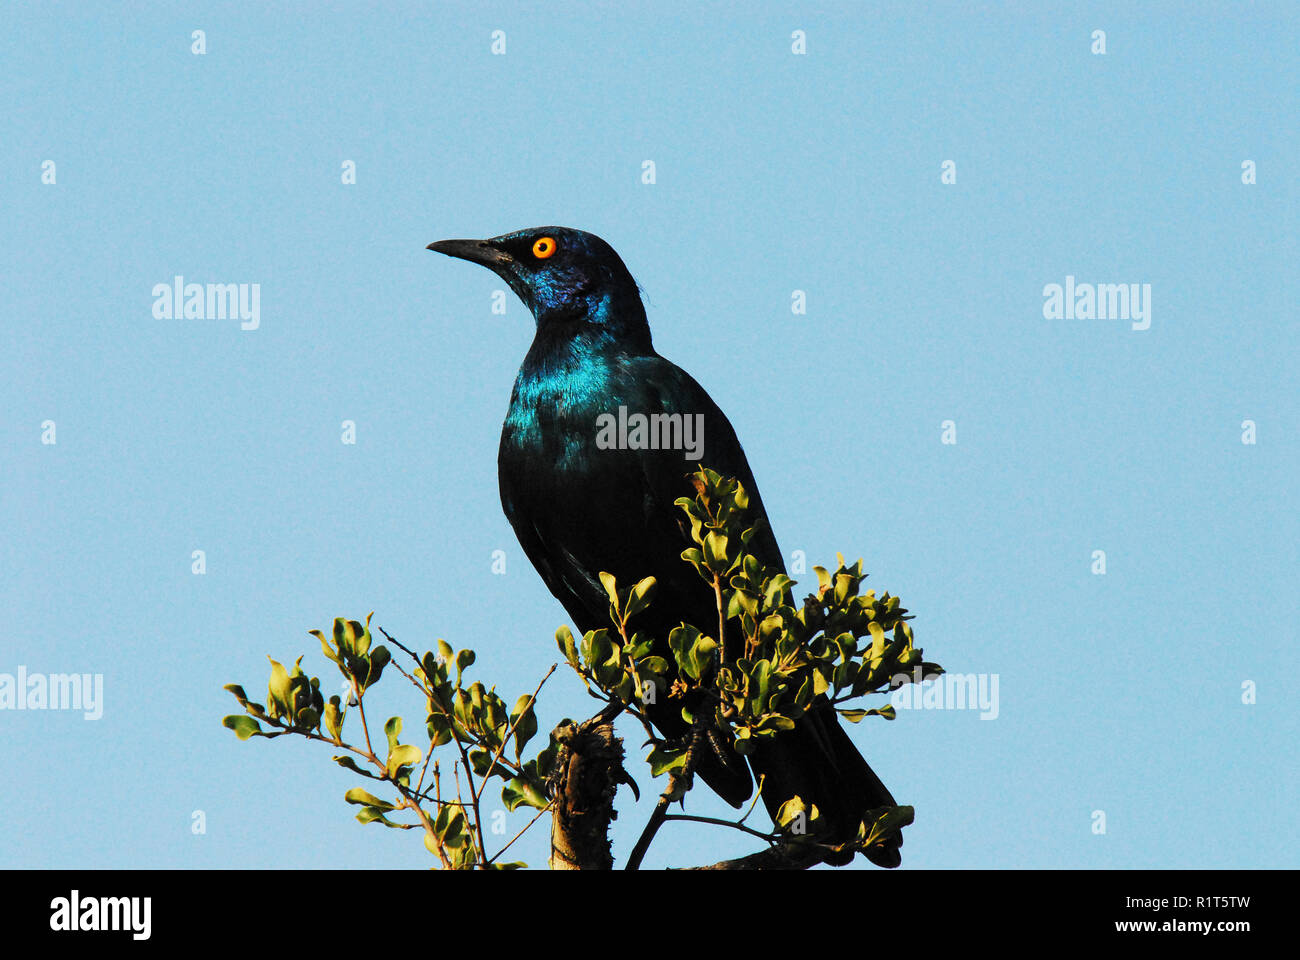 South Africa- Close up of a Cape Glossy Starling sitting on a tree top with a clear blue sky background.  Note the ample space for your text. Stock Photo